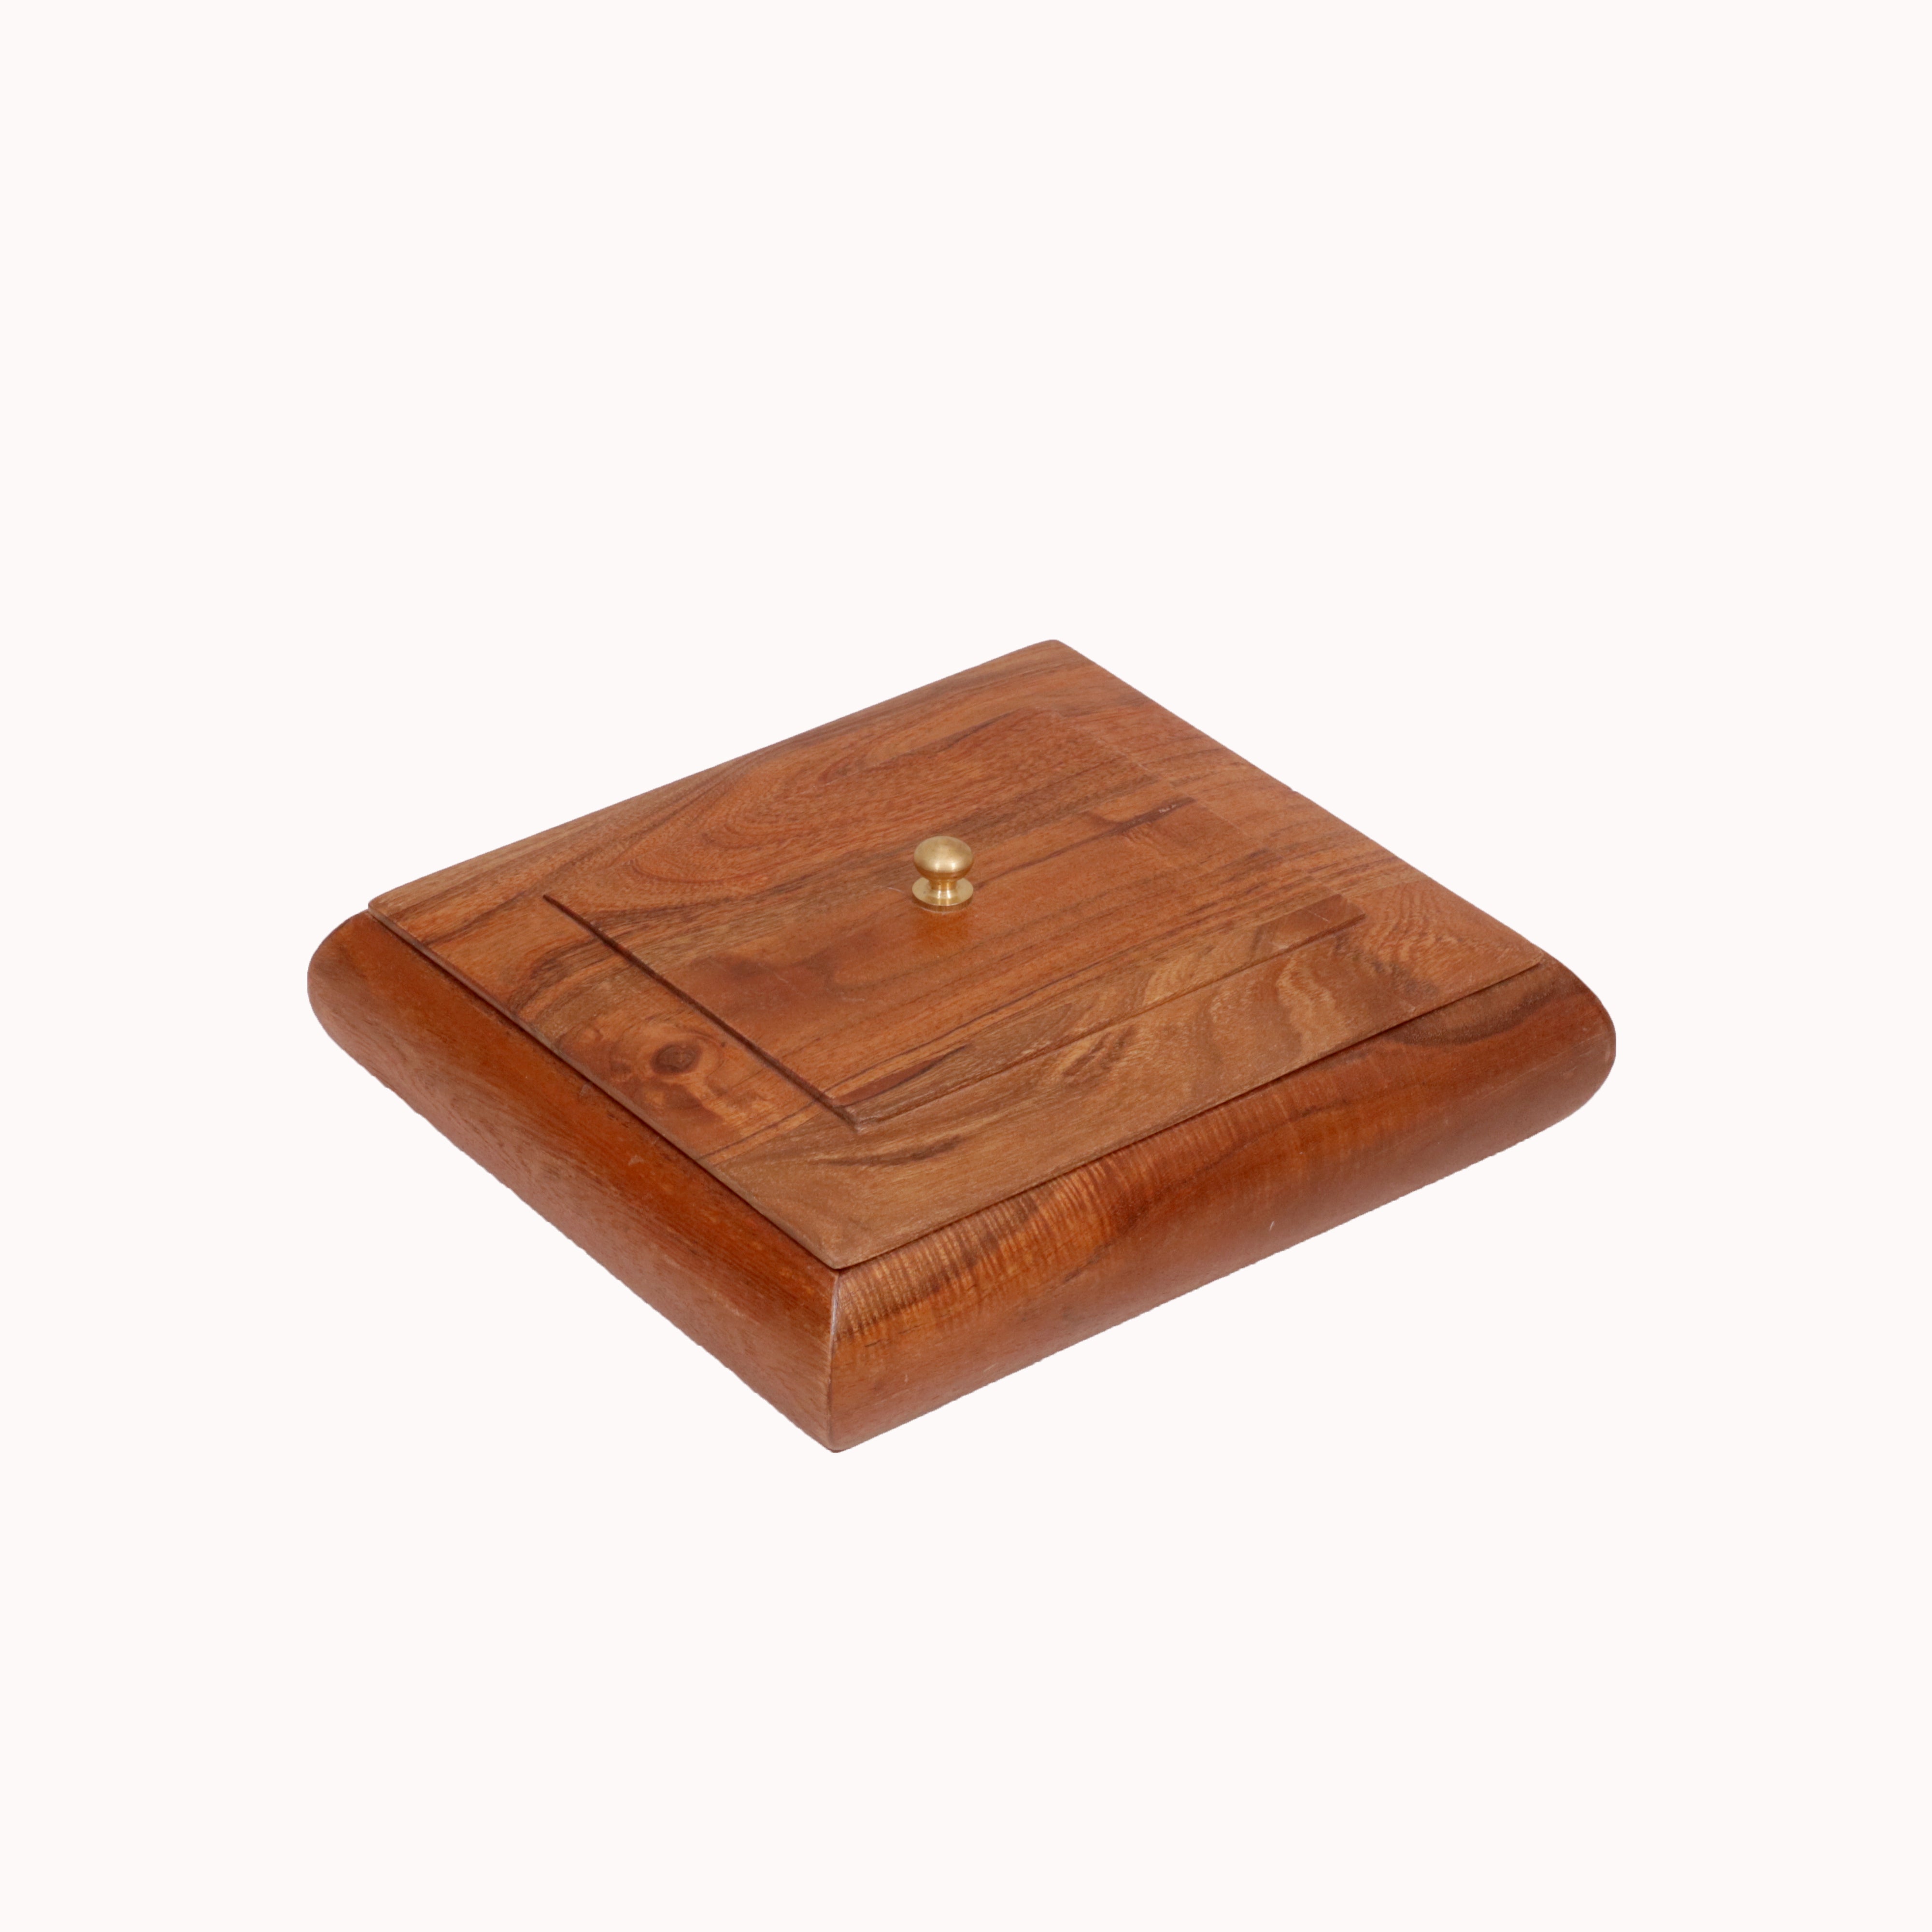 Rounded Sides Wooden Box Wooden Box